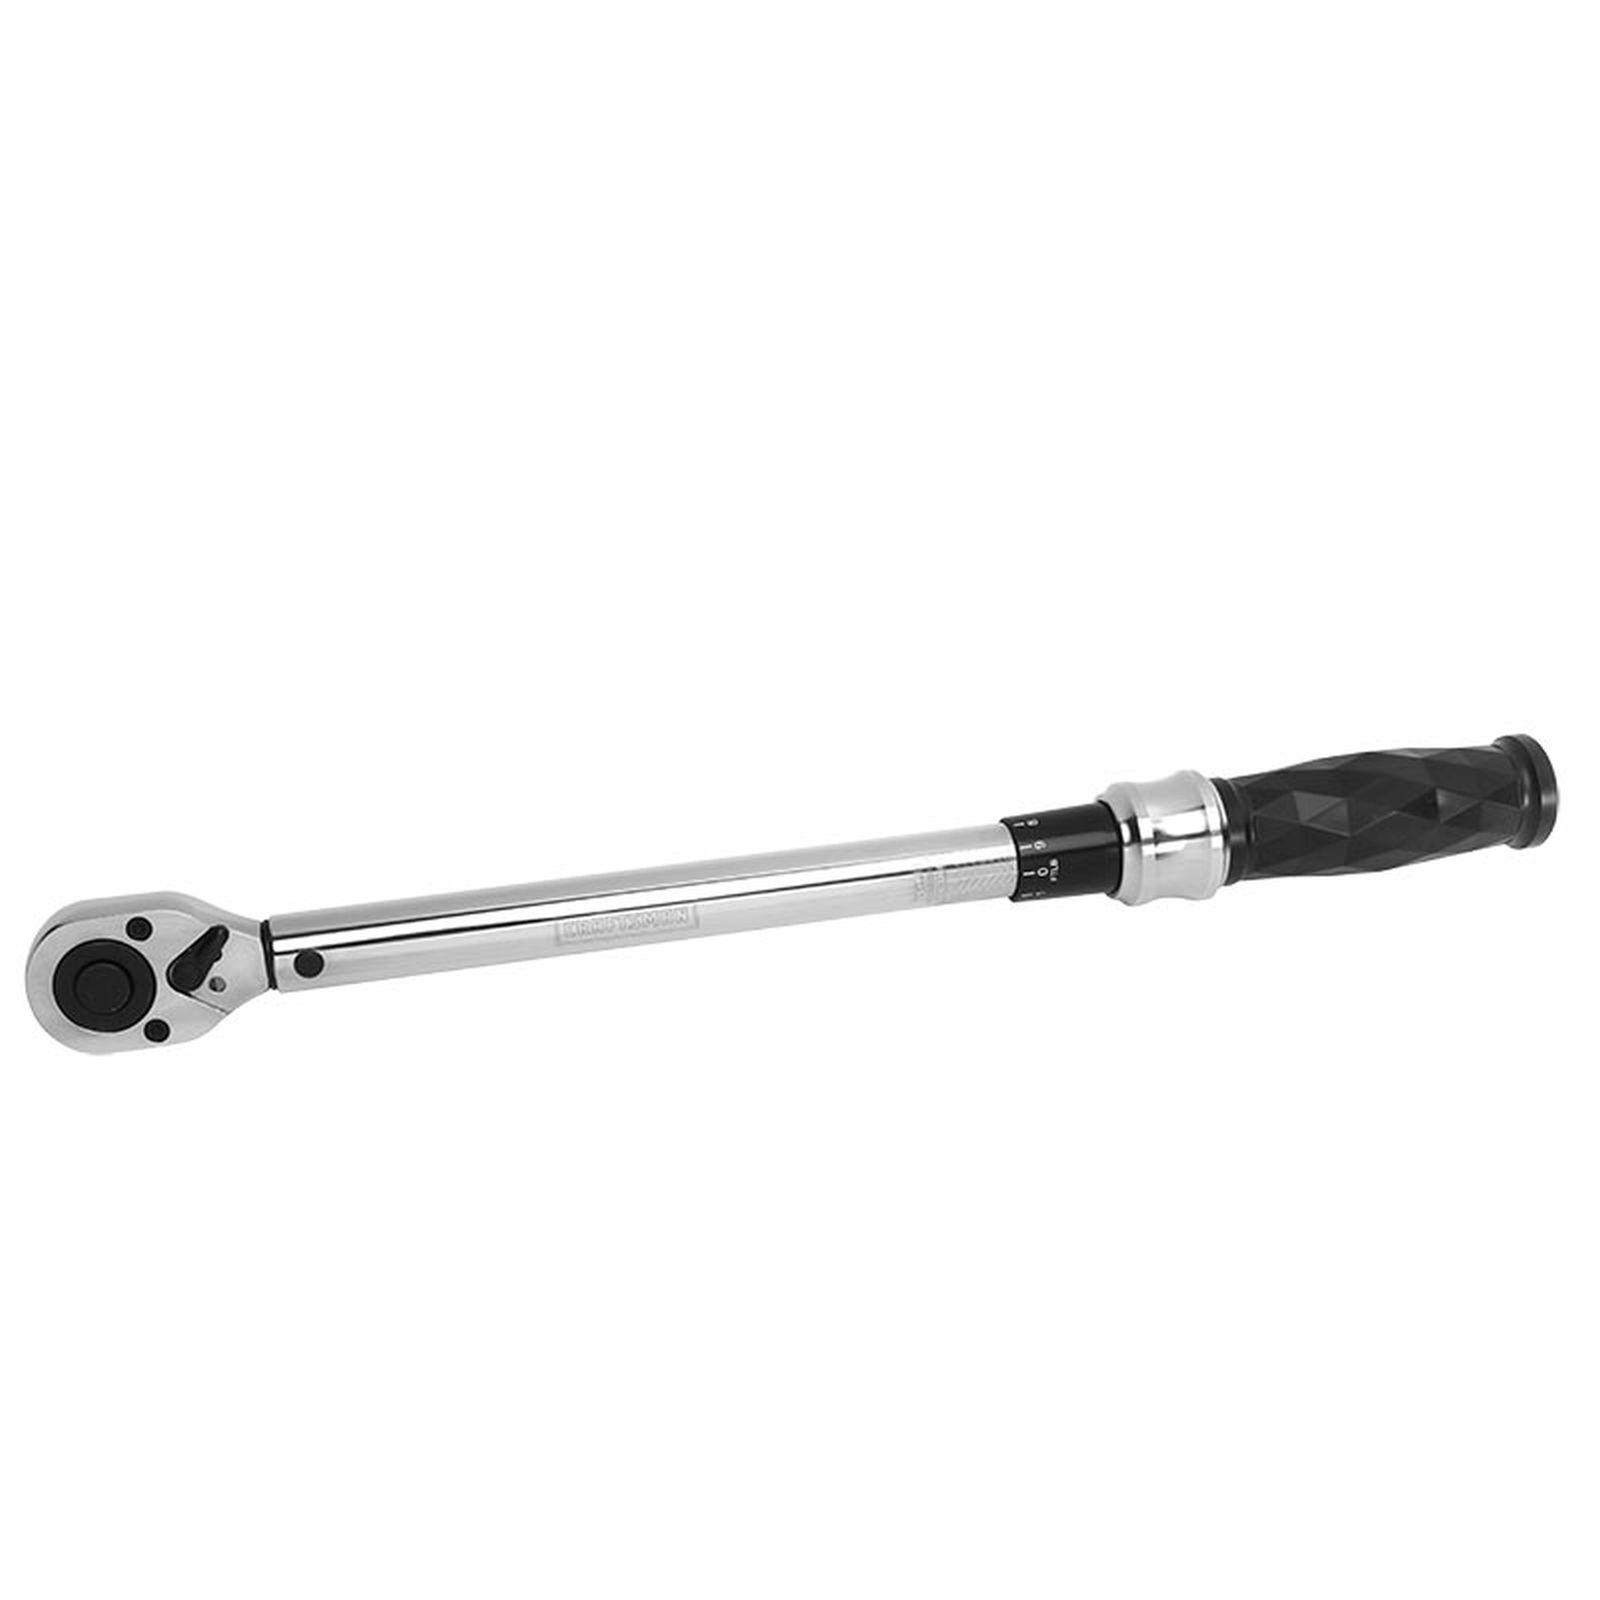 Torque Wrench 1/2” inch Drive 10-150 ft/lb 18” Long Click-Type Hand Tool w/ Case 